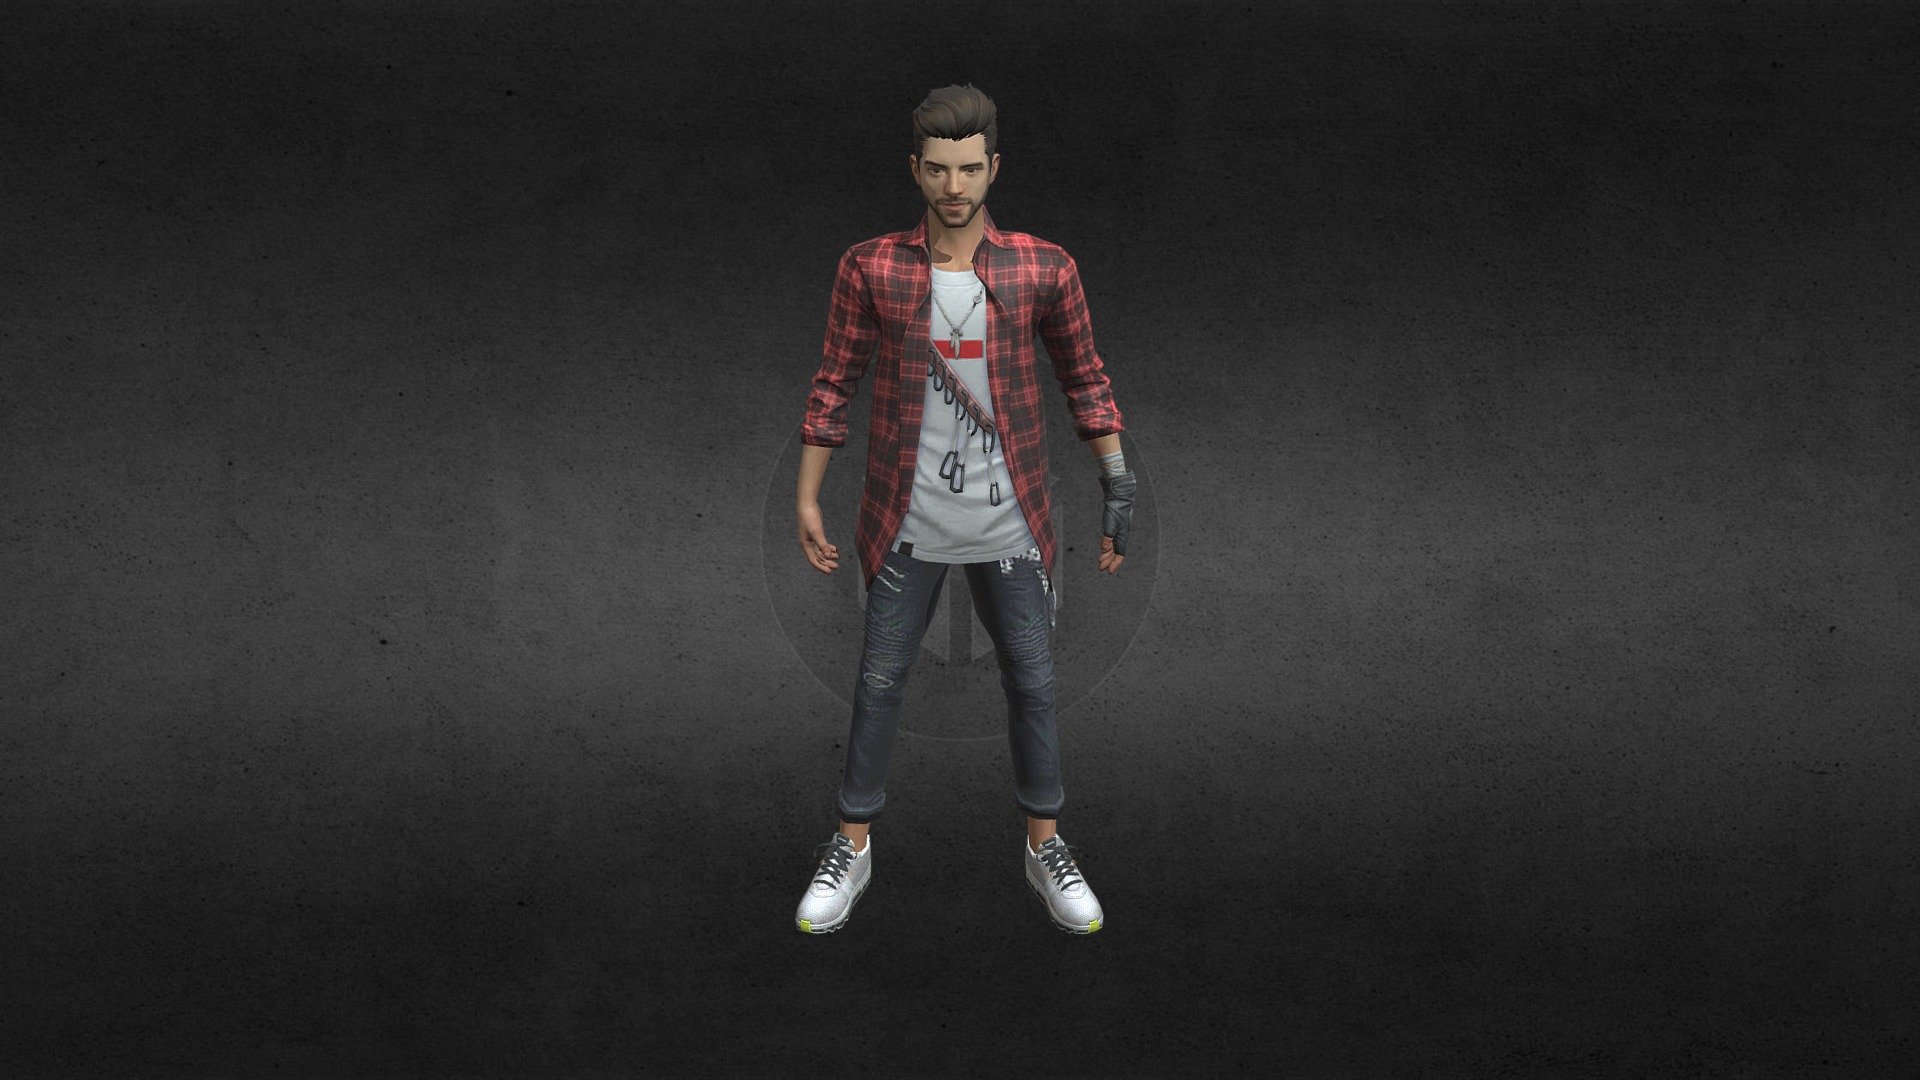 Download : https://daniblogs.com/BF/421426uq
Hello frnds i am M.Rahaman. Here your free 3d model. you can use it free. you can visit my YT Channel BROKIE FF. Subscribe my channel for more

Please Support Me On YouTube - Youngster Bundle_free fire - 3D model by BrOkiE FF (@mafujarrahaman123) 3d model